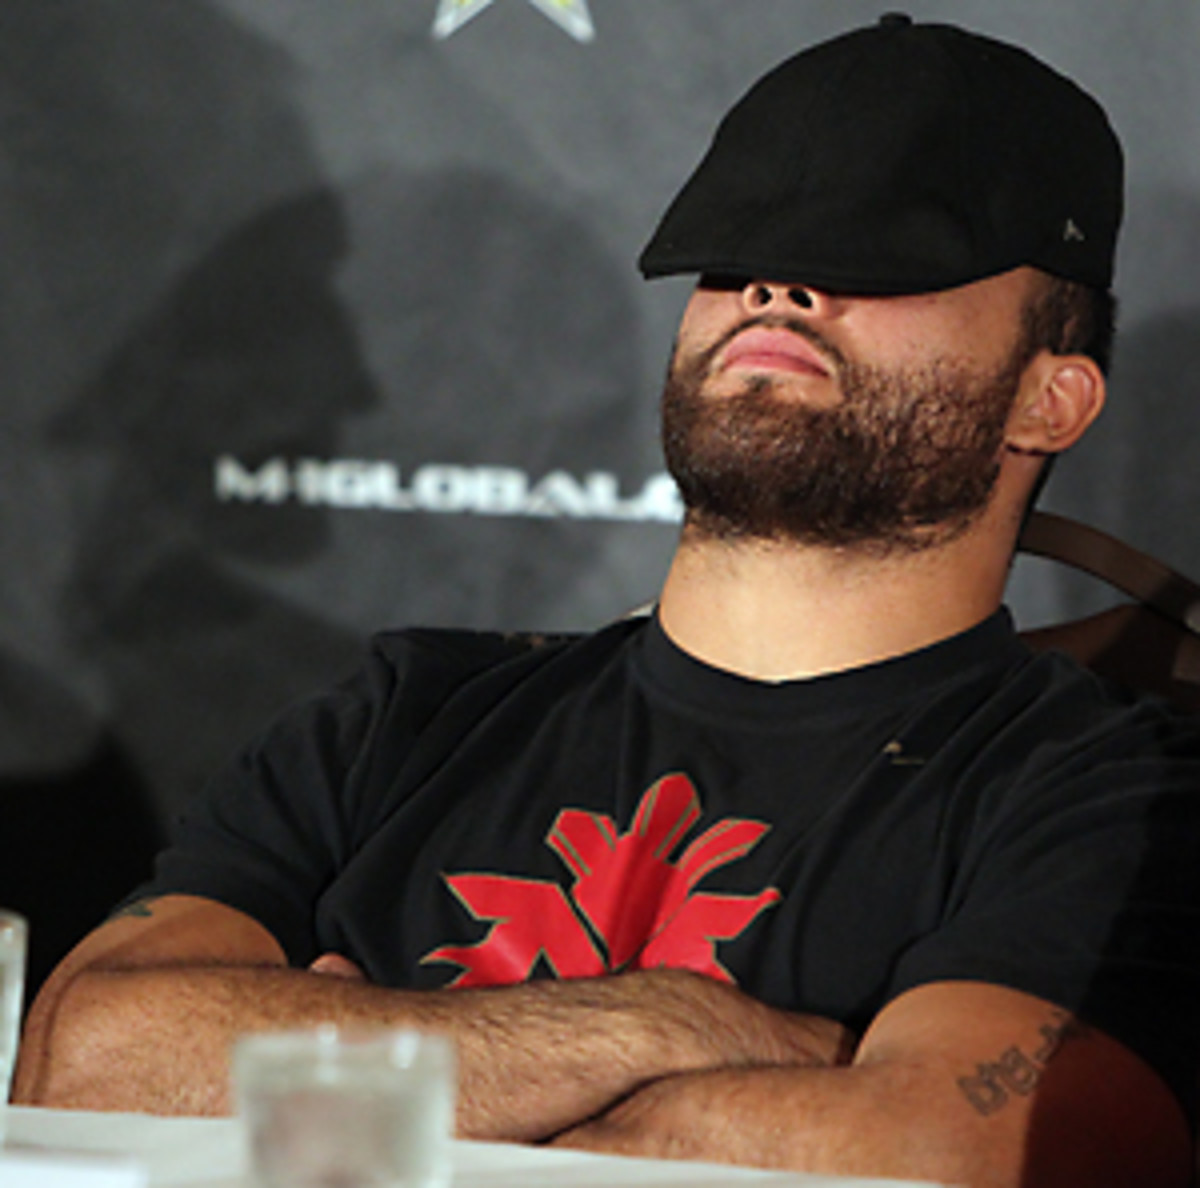 Before Zuffa's purchase of Strikeforce roused his career, Robbie Lawler couldn't even stay awake for his own fight press conferences.